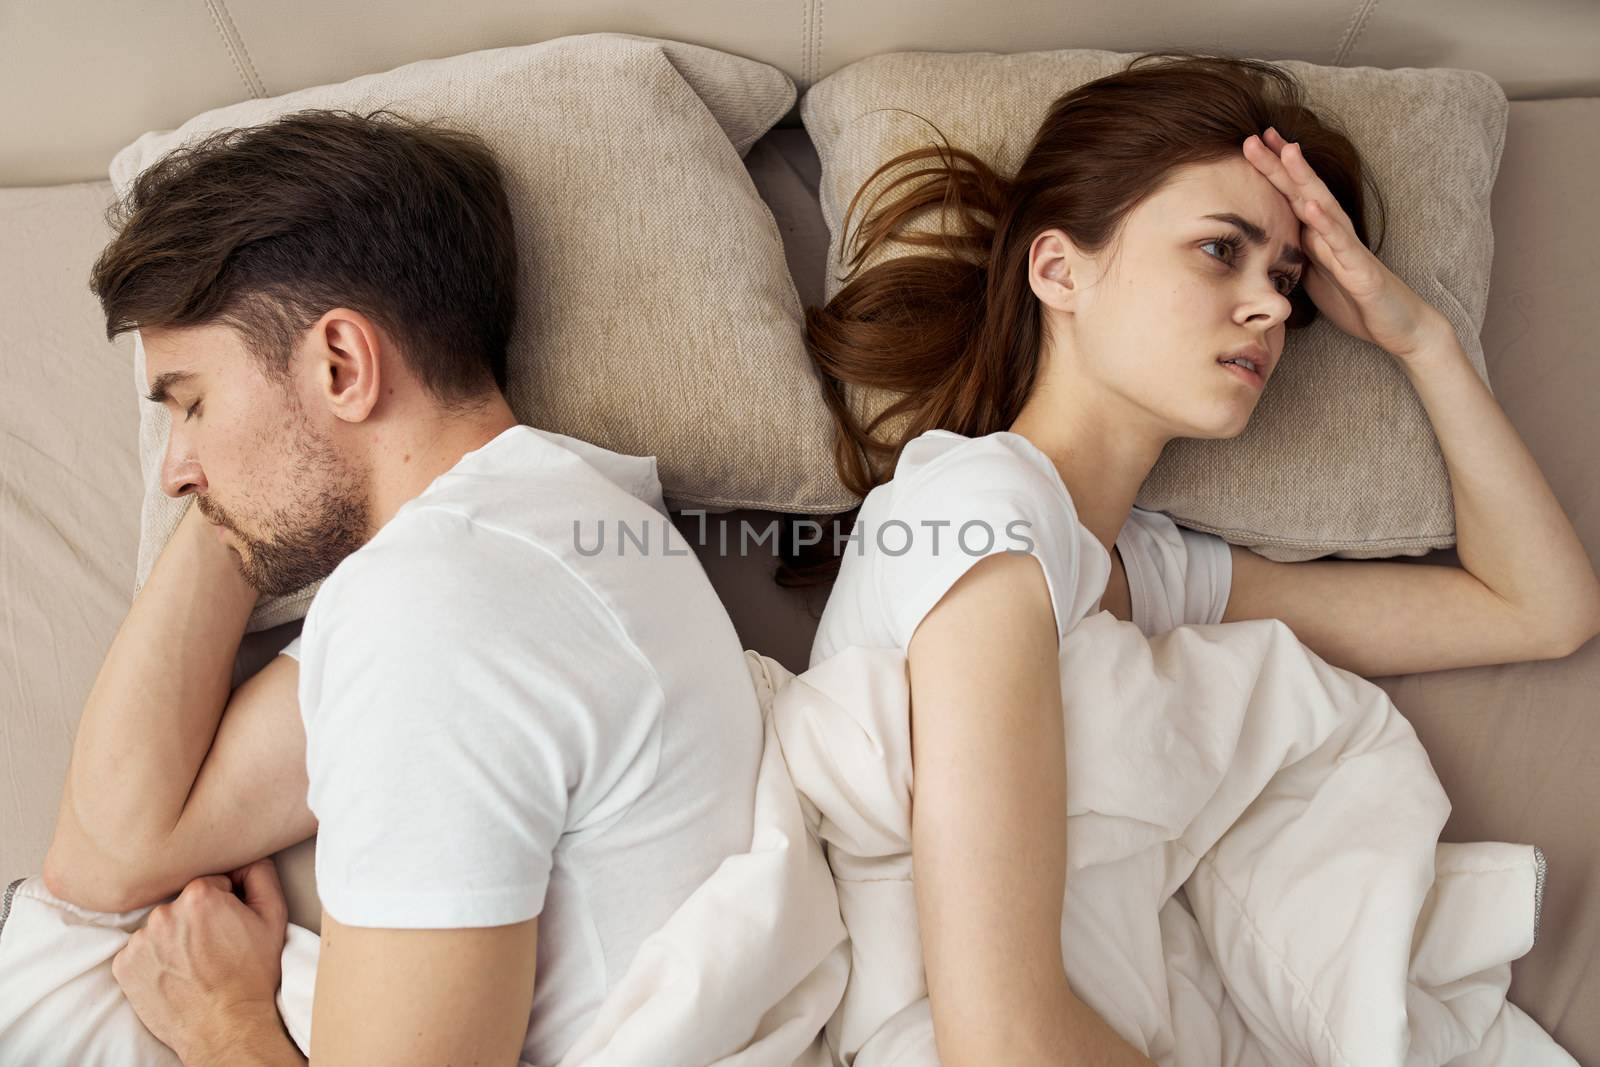 An upset woman lies in bed and the man next to her by SHOTPRIME